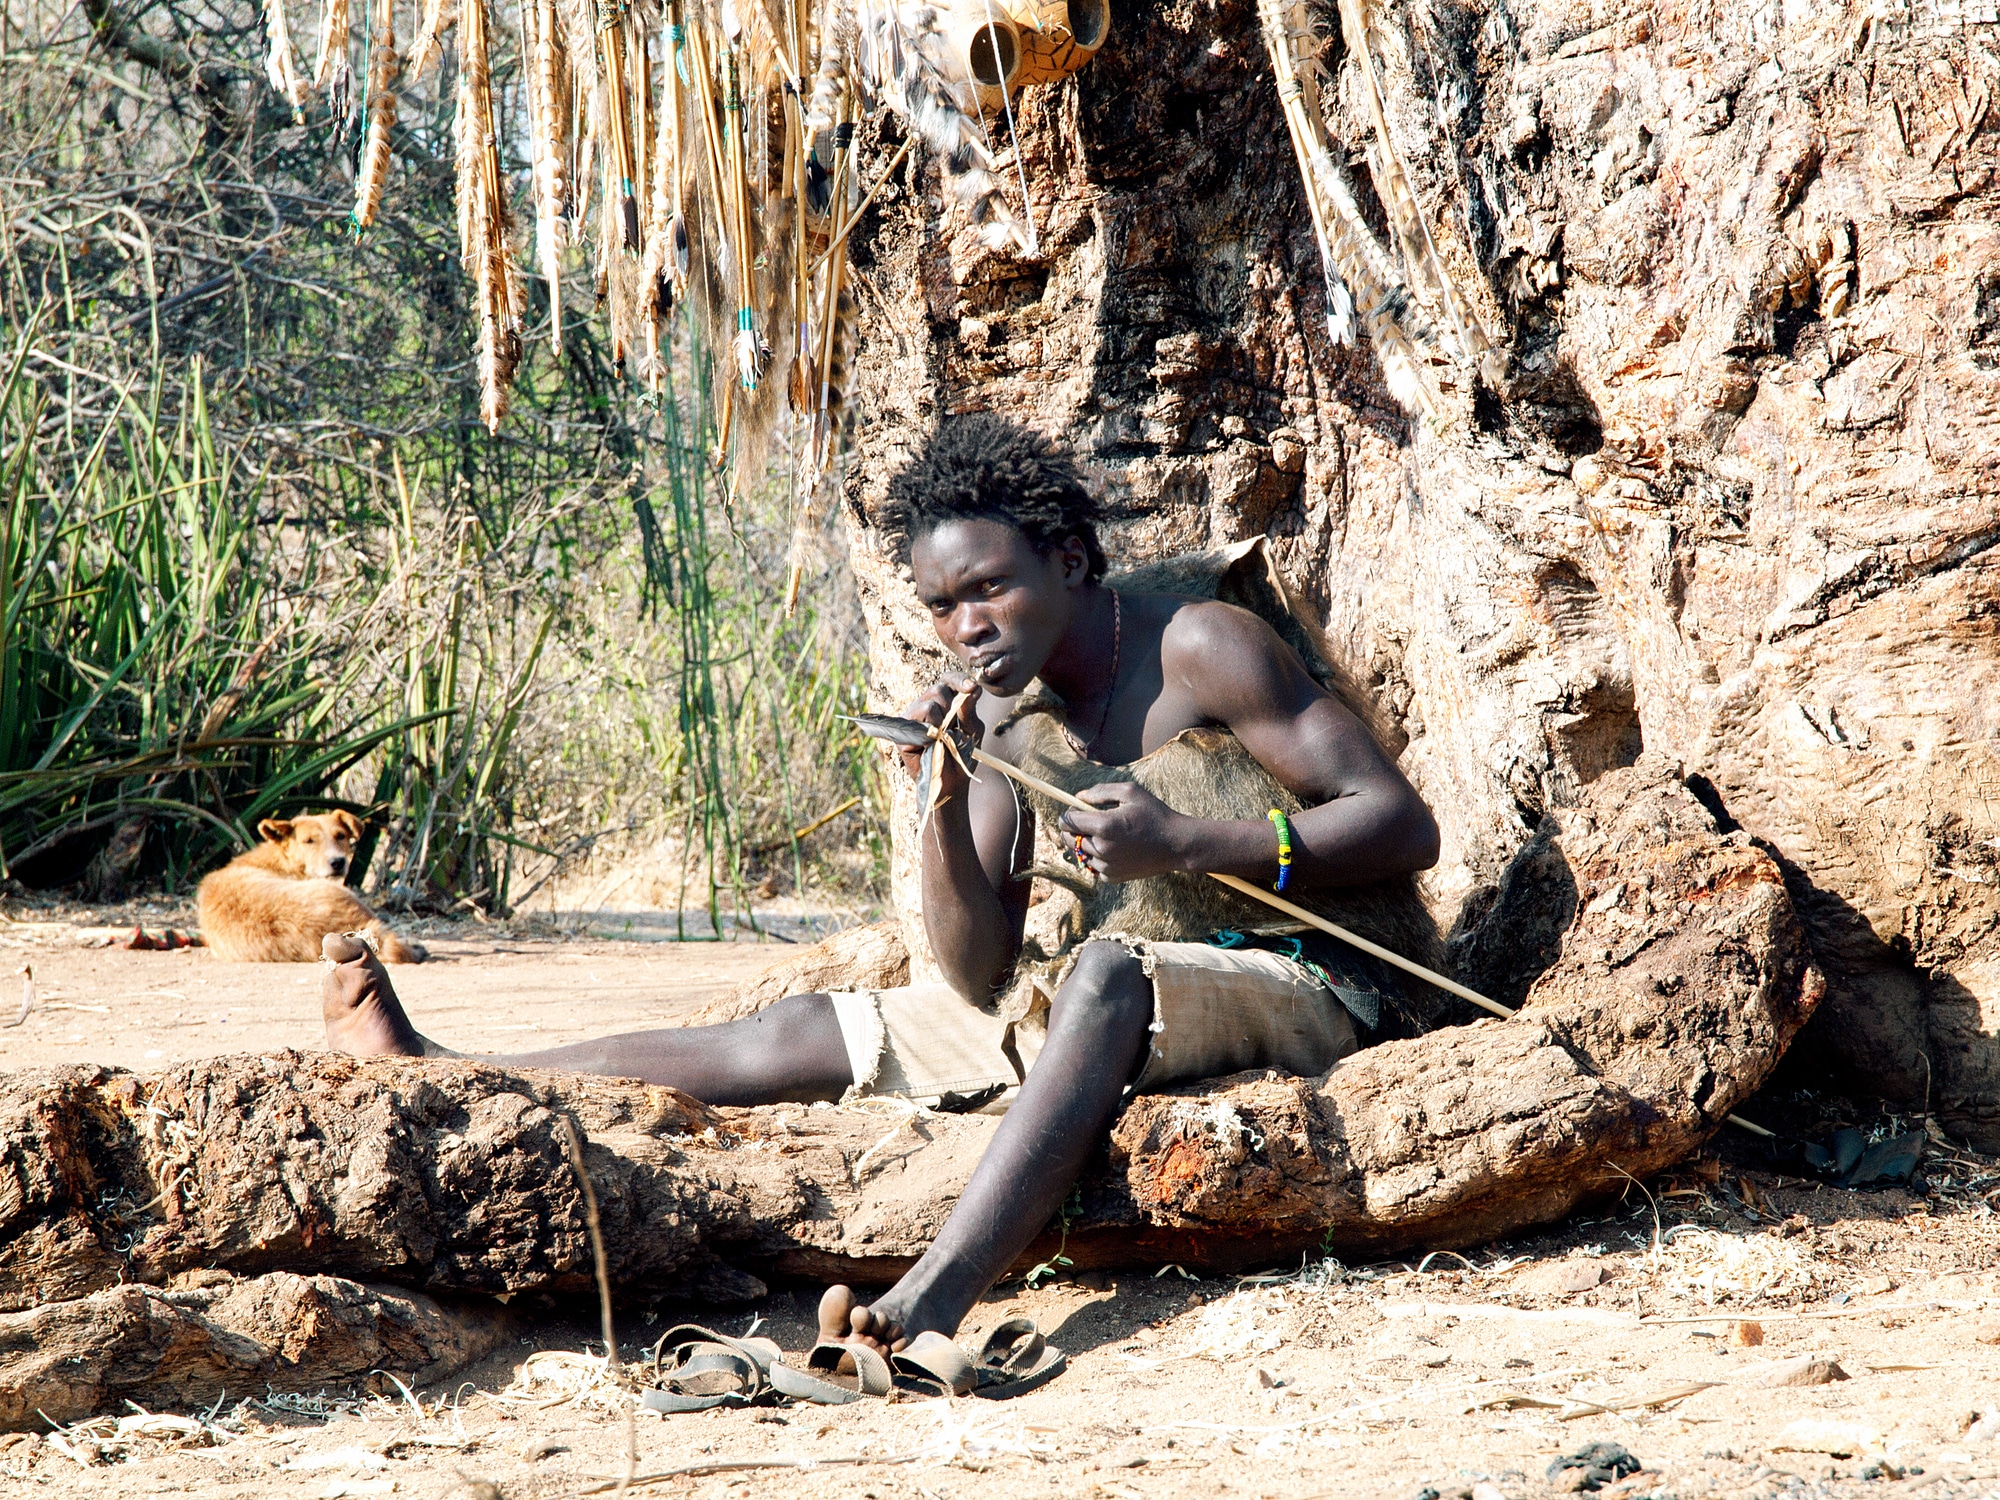 Hadzabe  young bushman making the arrow for a hunting bow